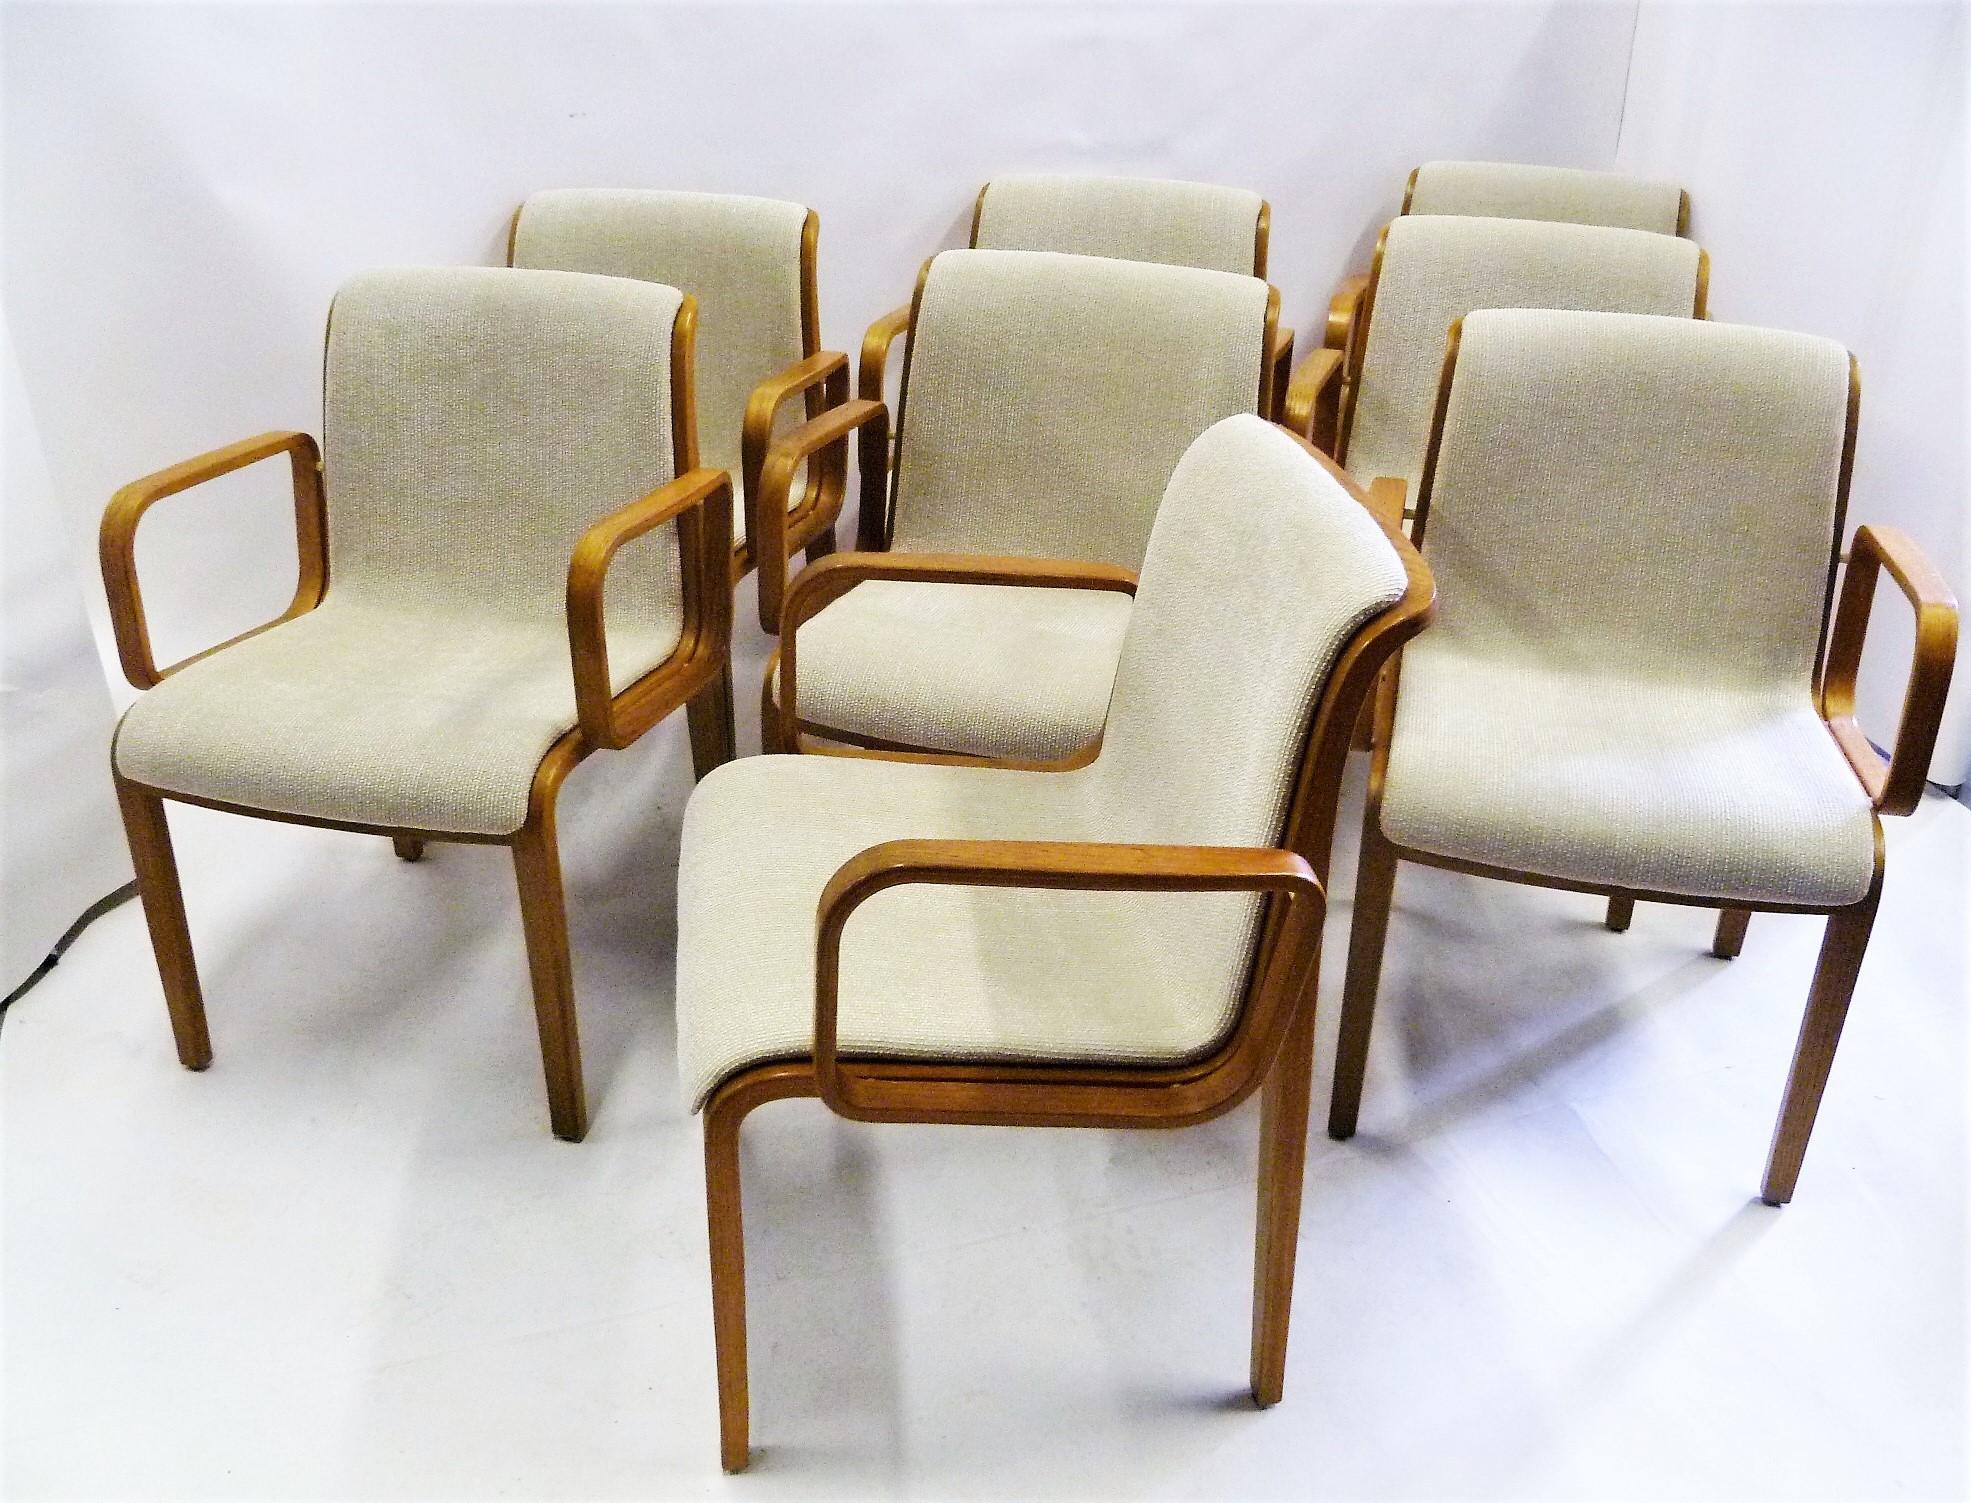 Late 20th Century 8 Bill Stephens Midcentury 1300 Series Armed Dining Chairs for Knoll